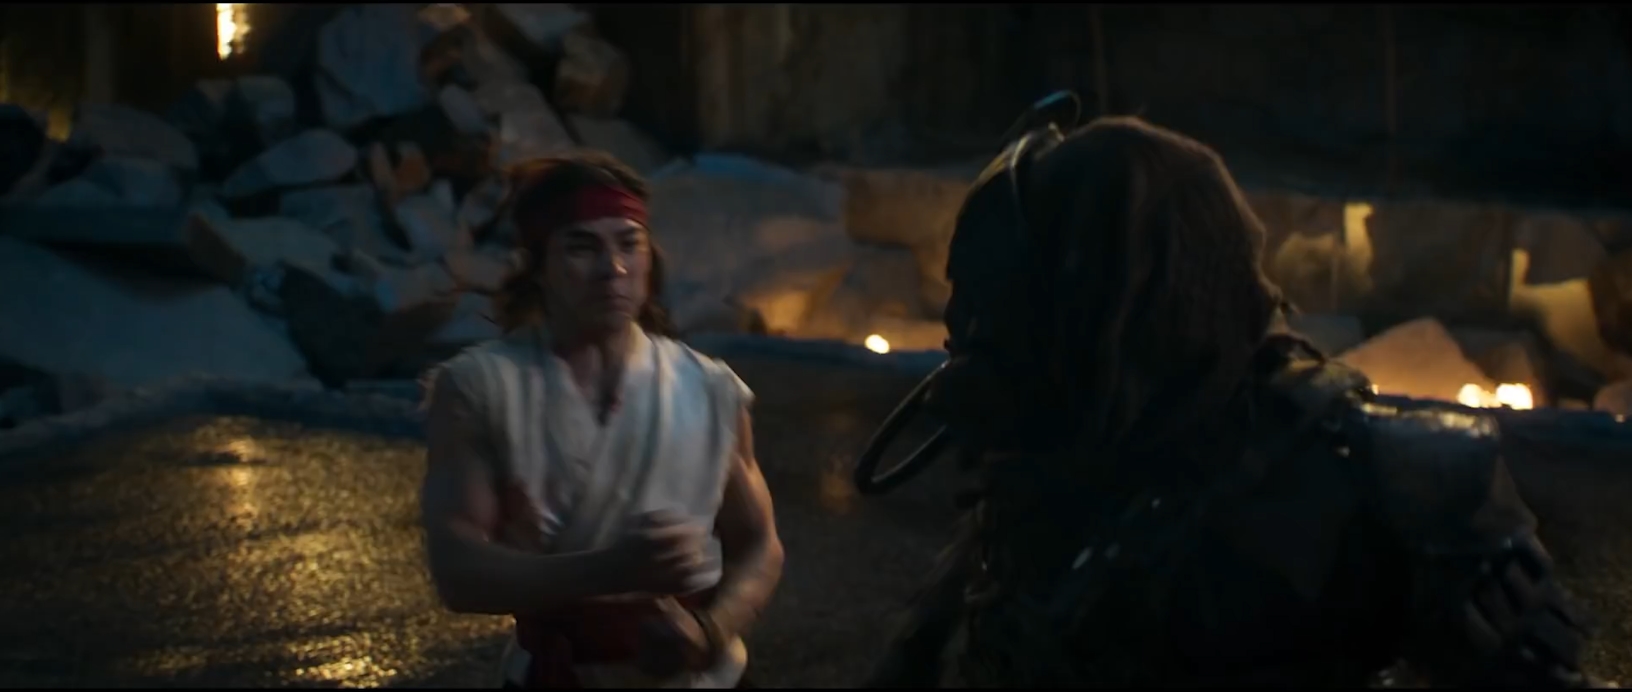 Mortal Kombat trailer: 16 secrets and easters eggs that have been beaten